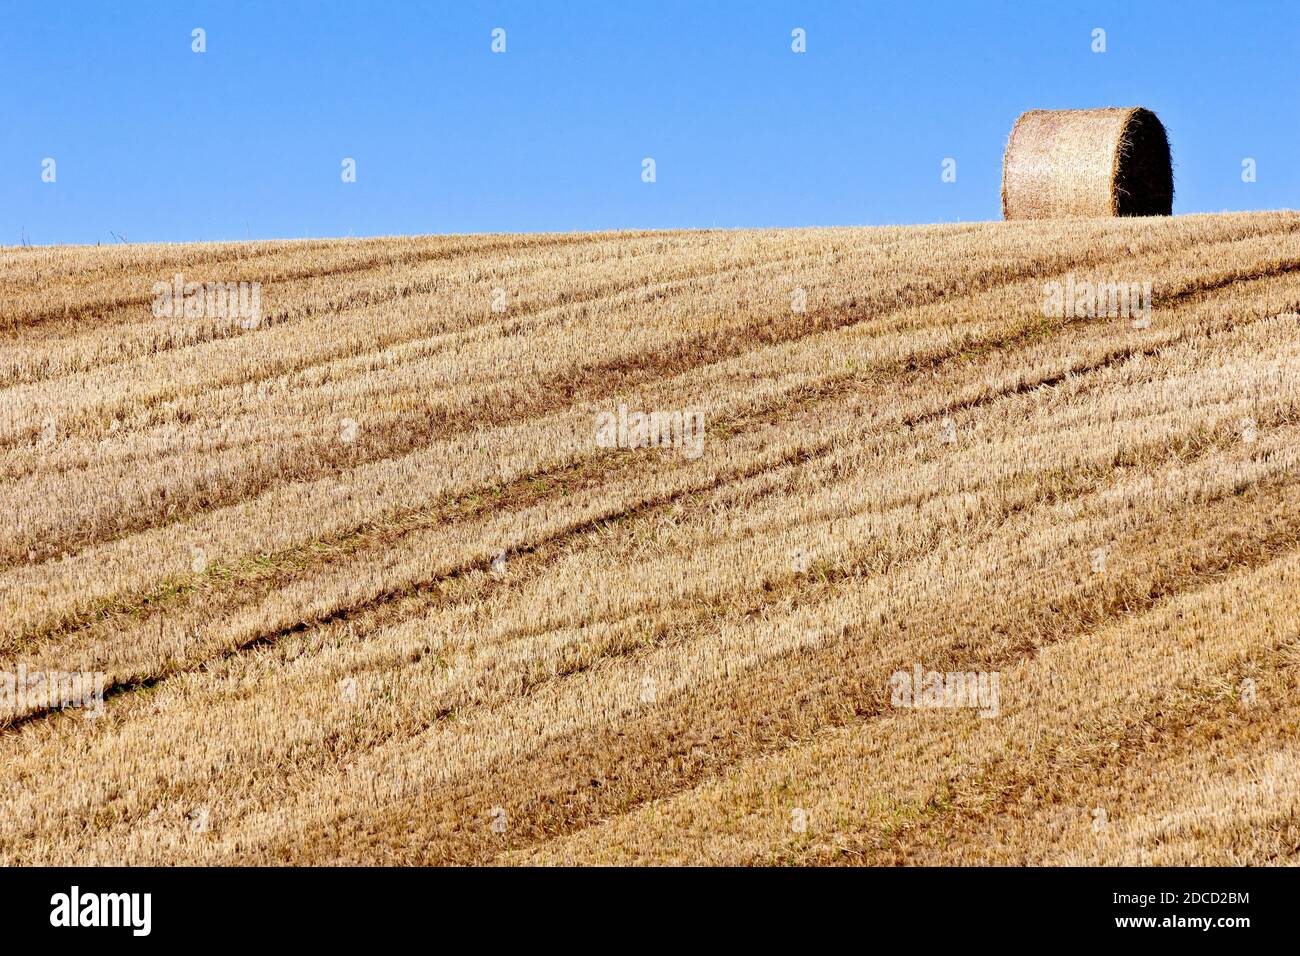 A harvested field, showing the stubble and a single bale of straw left sitting on the crest of the hill. Stock Photo